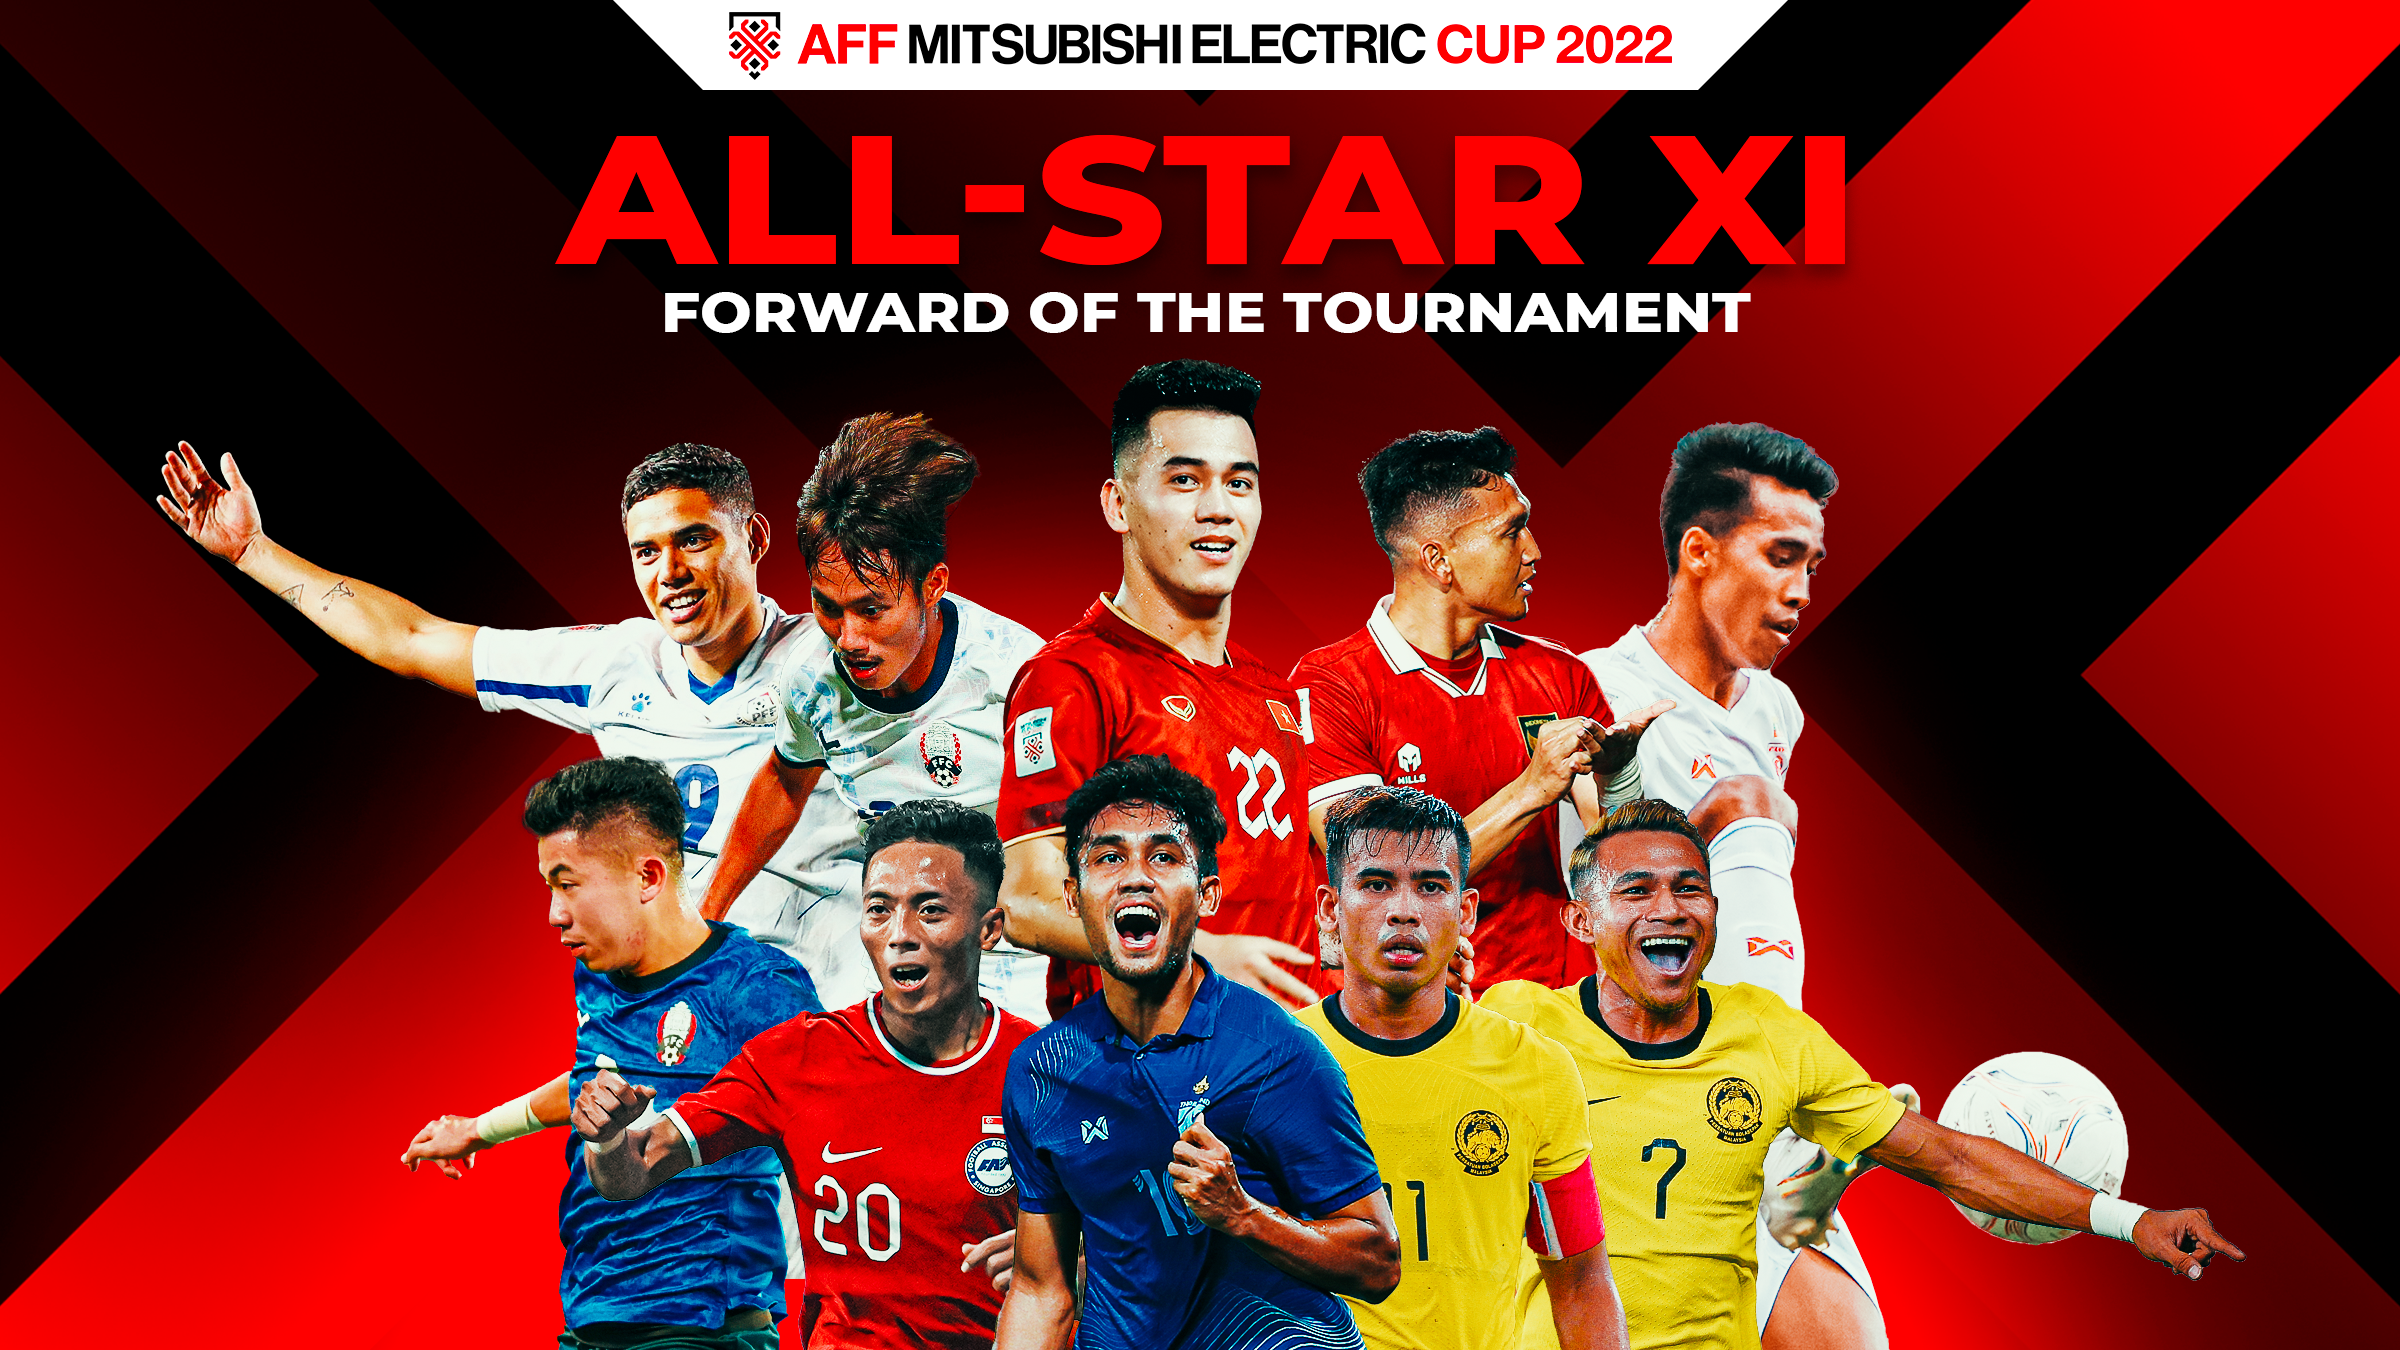 Vote For Your All-Star XI Forward Of The Tournament